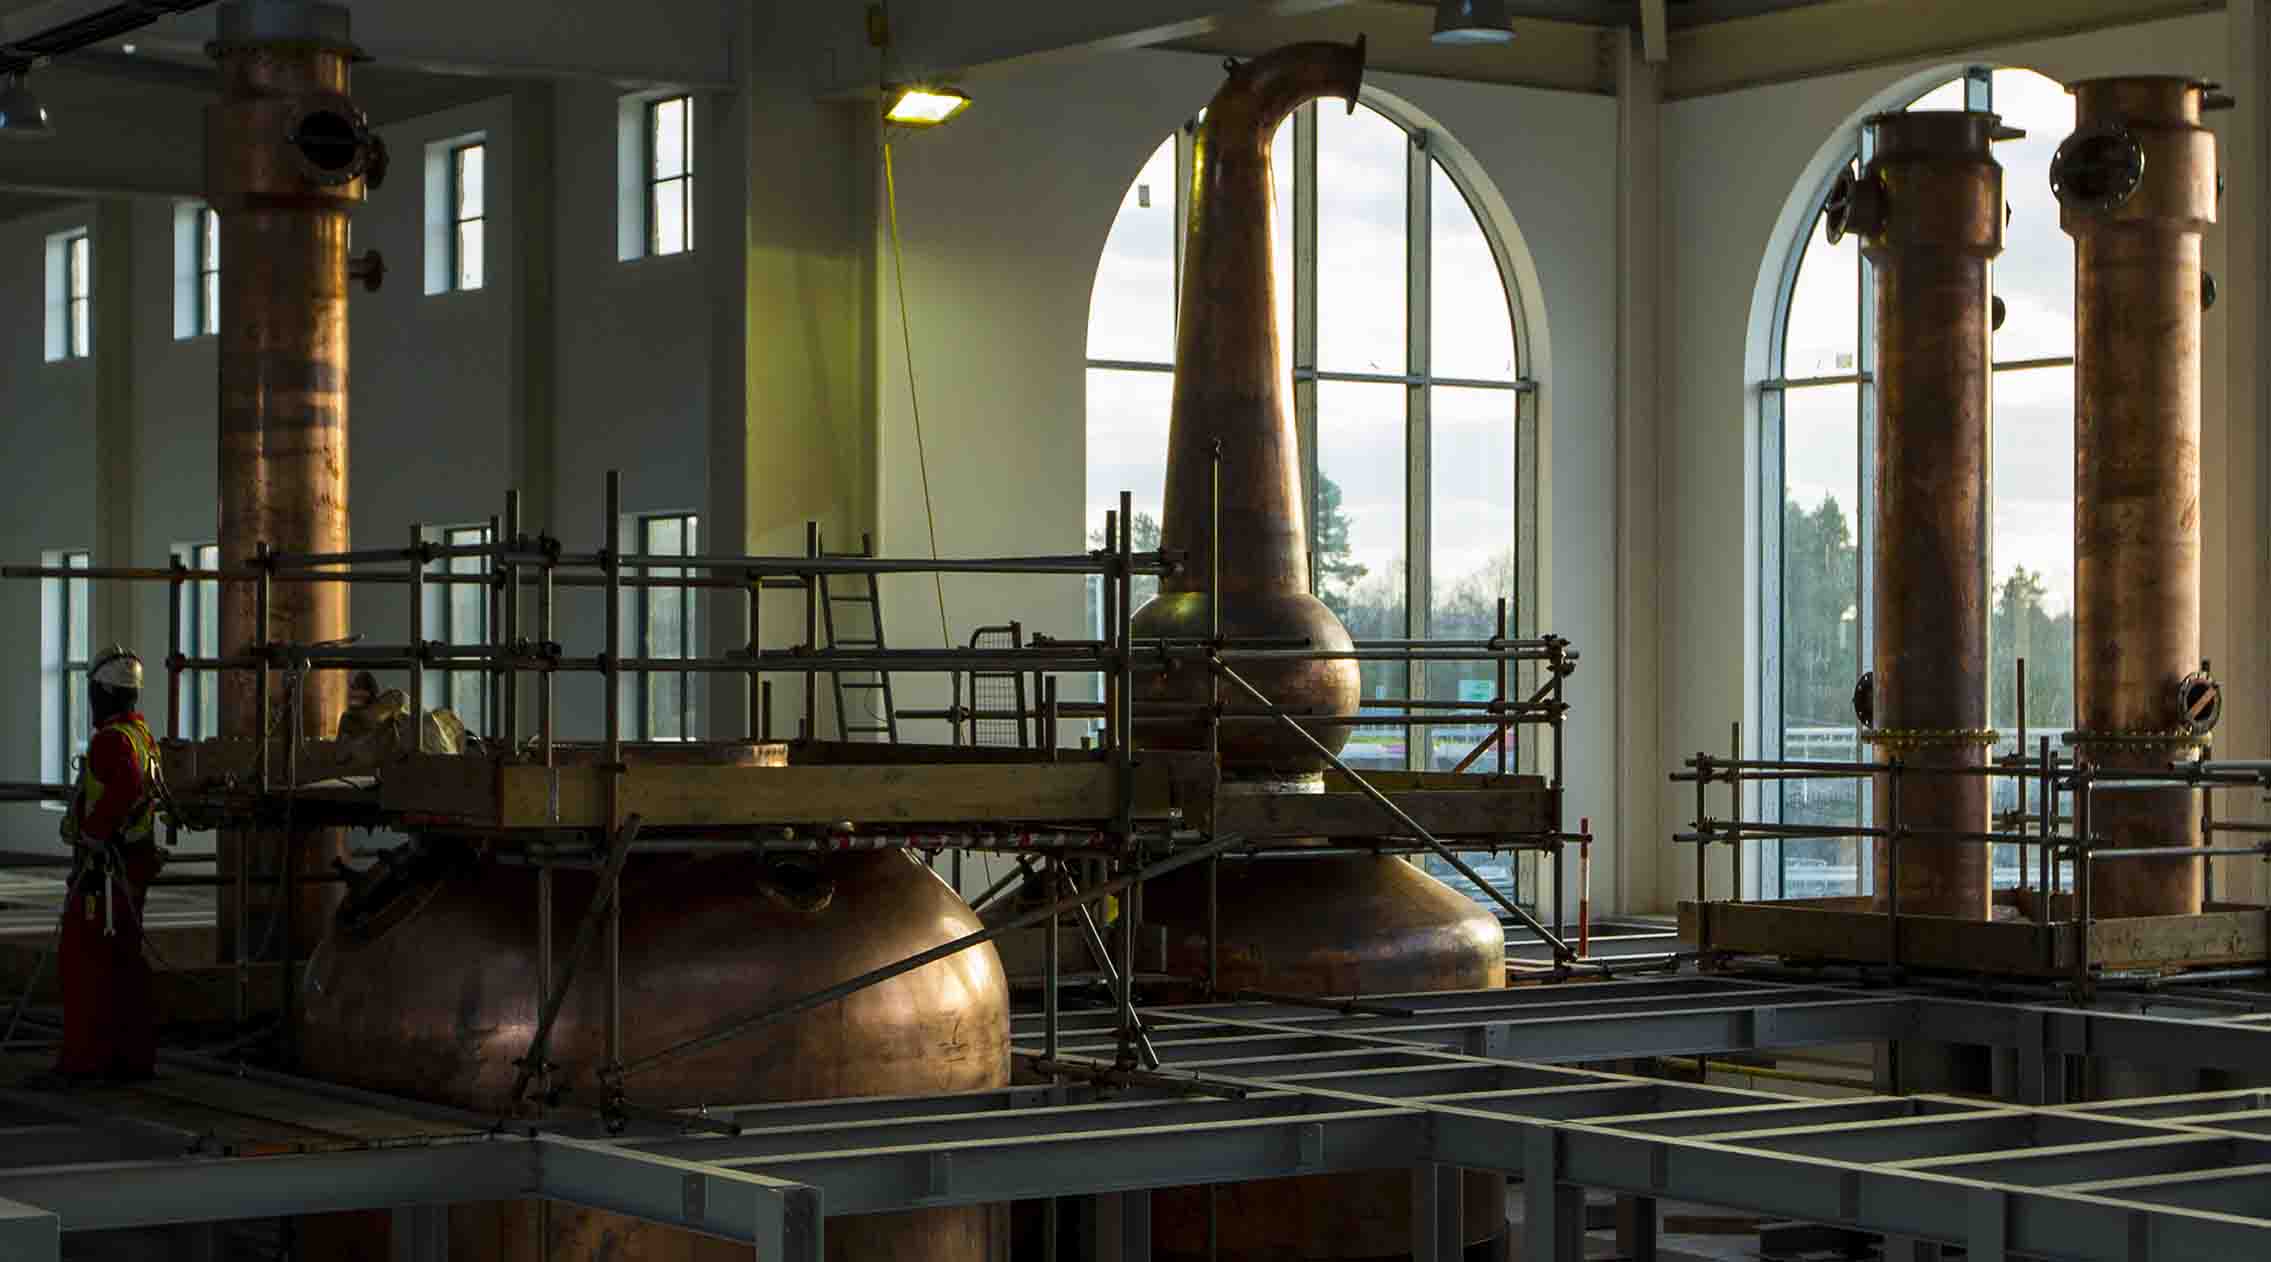 The Irish whiskey industry has reacted to the huge increase in demand by launching new products and opening new distilleries across the island of Ireland.